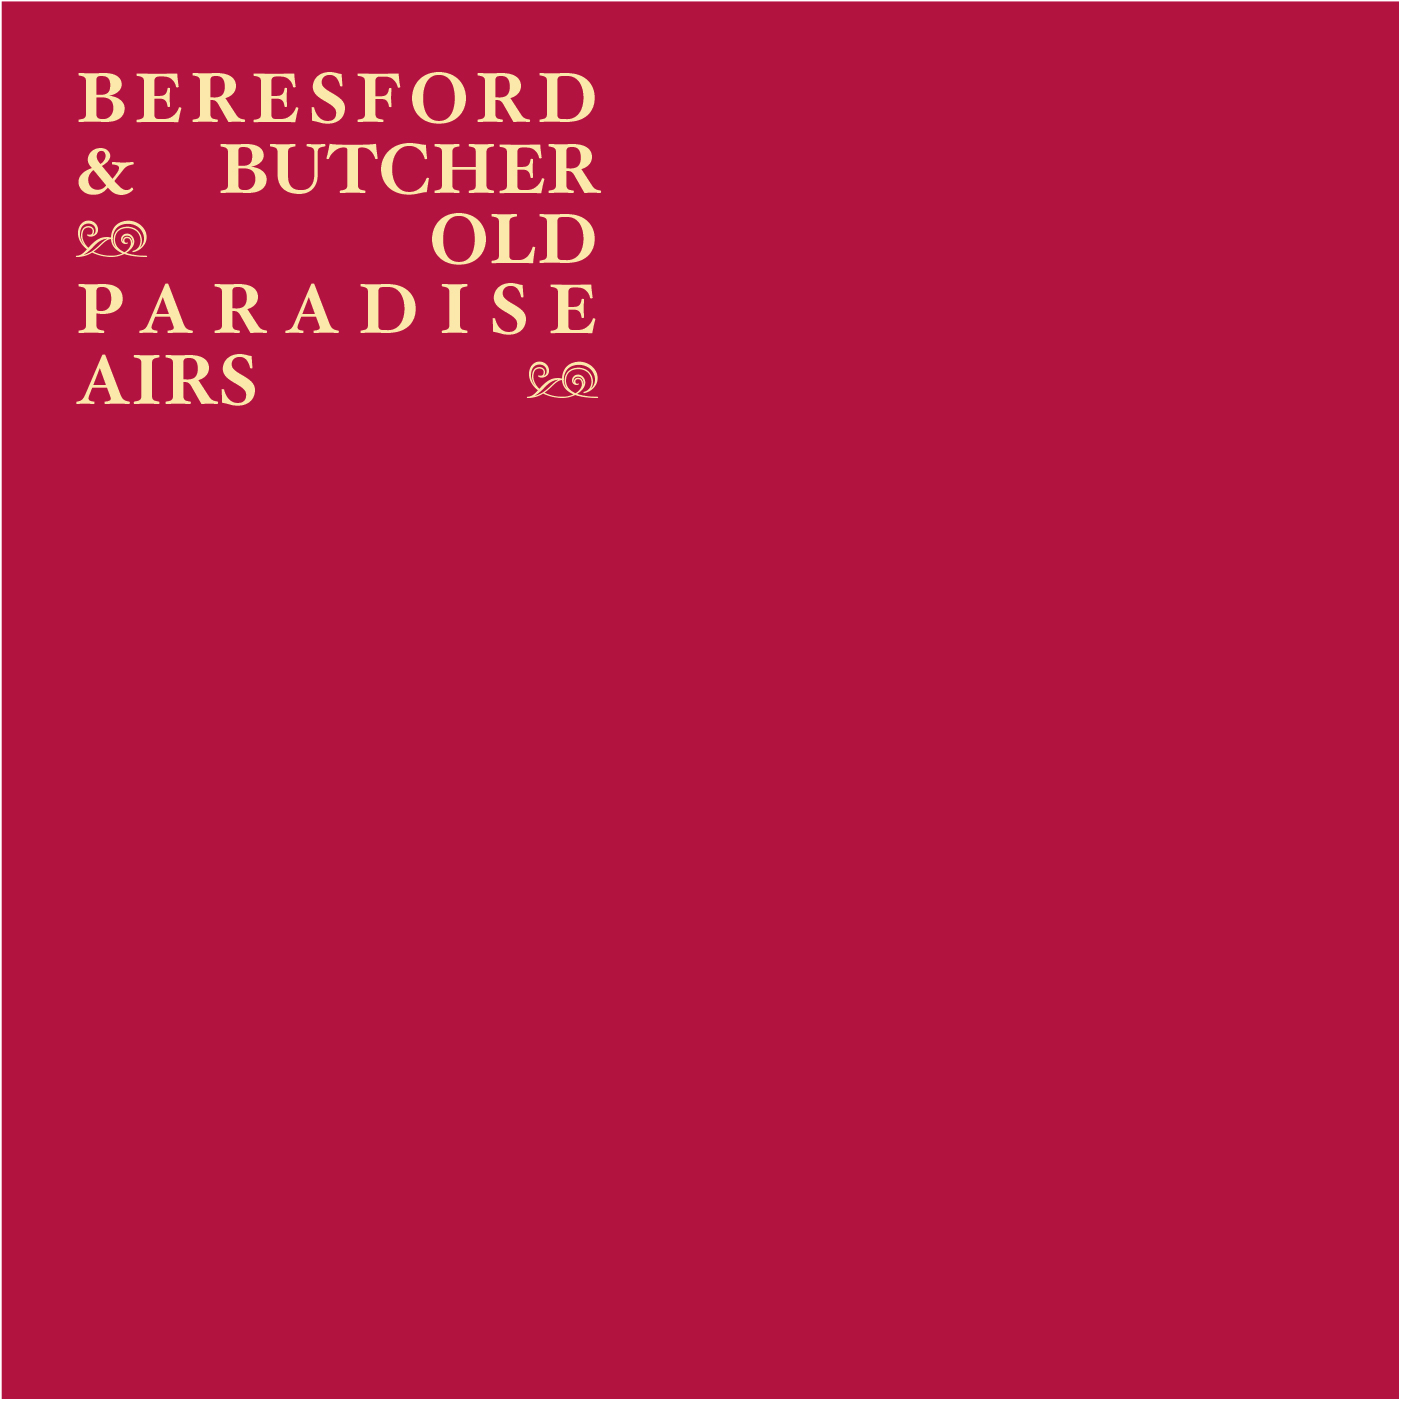 Old Paradise Airs by Steve Beresford &amp; John Butcher